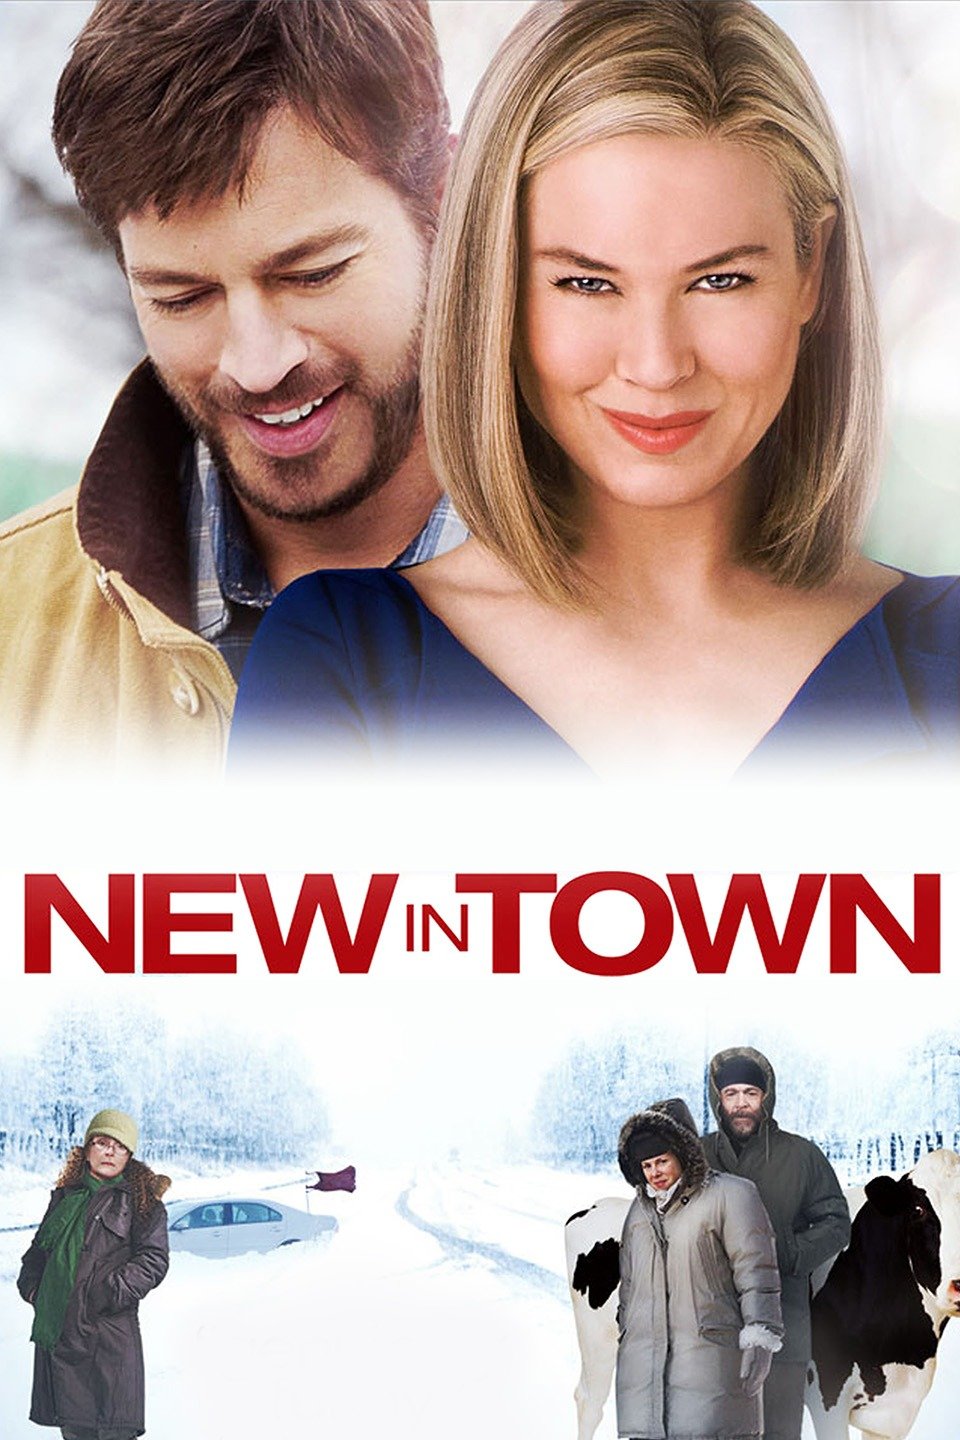 New in Town [HD] (2009)